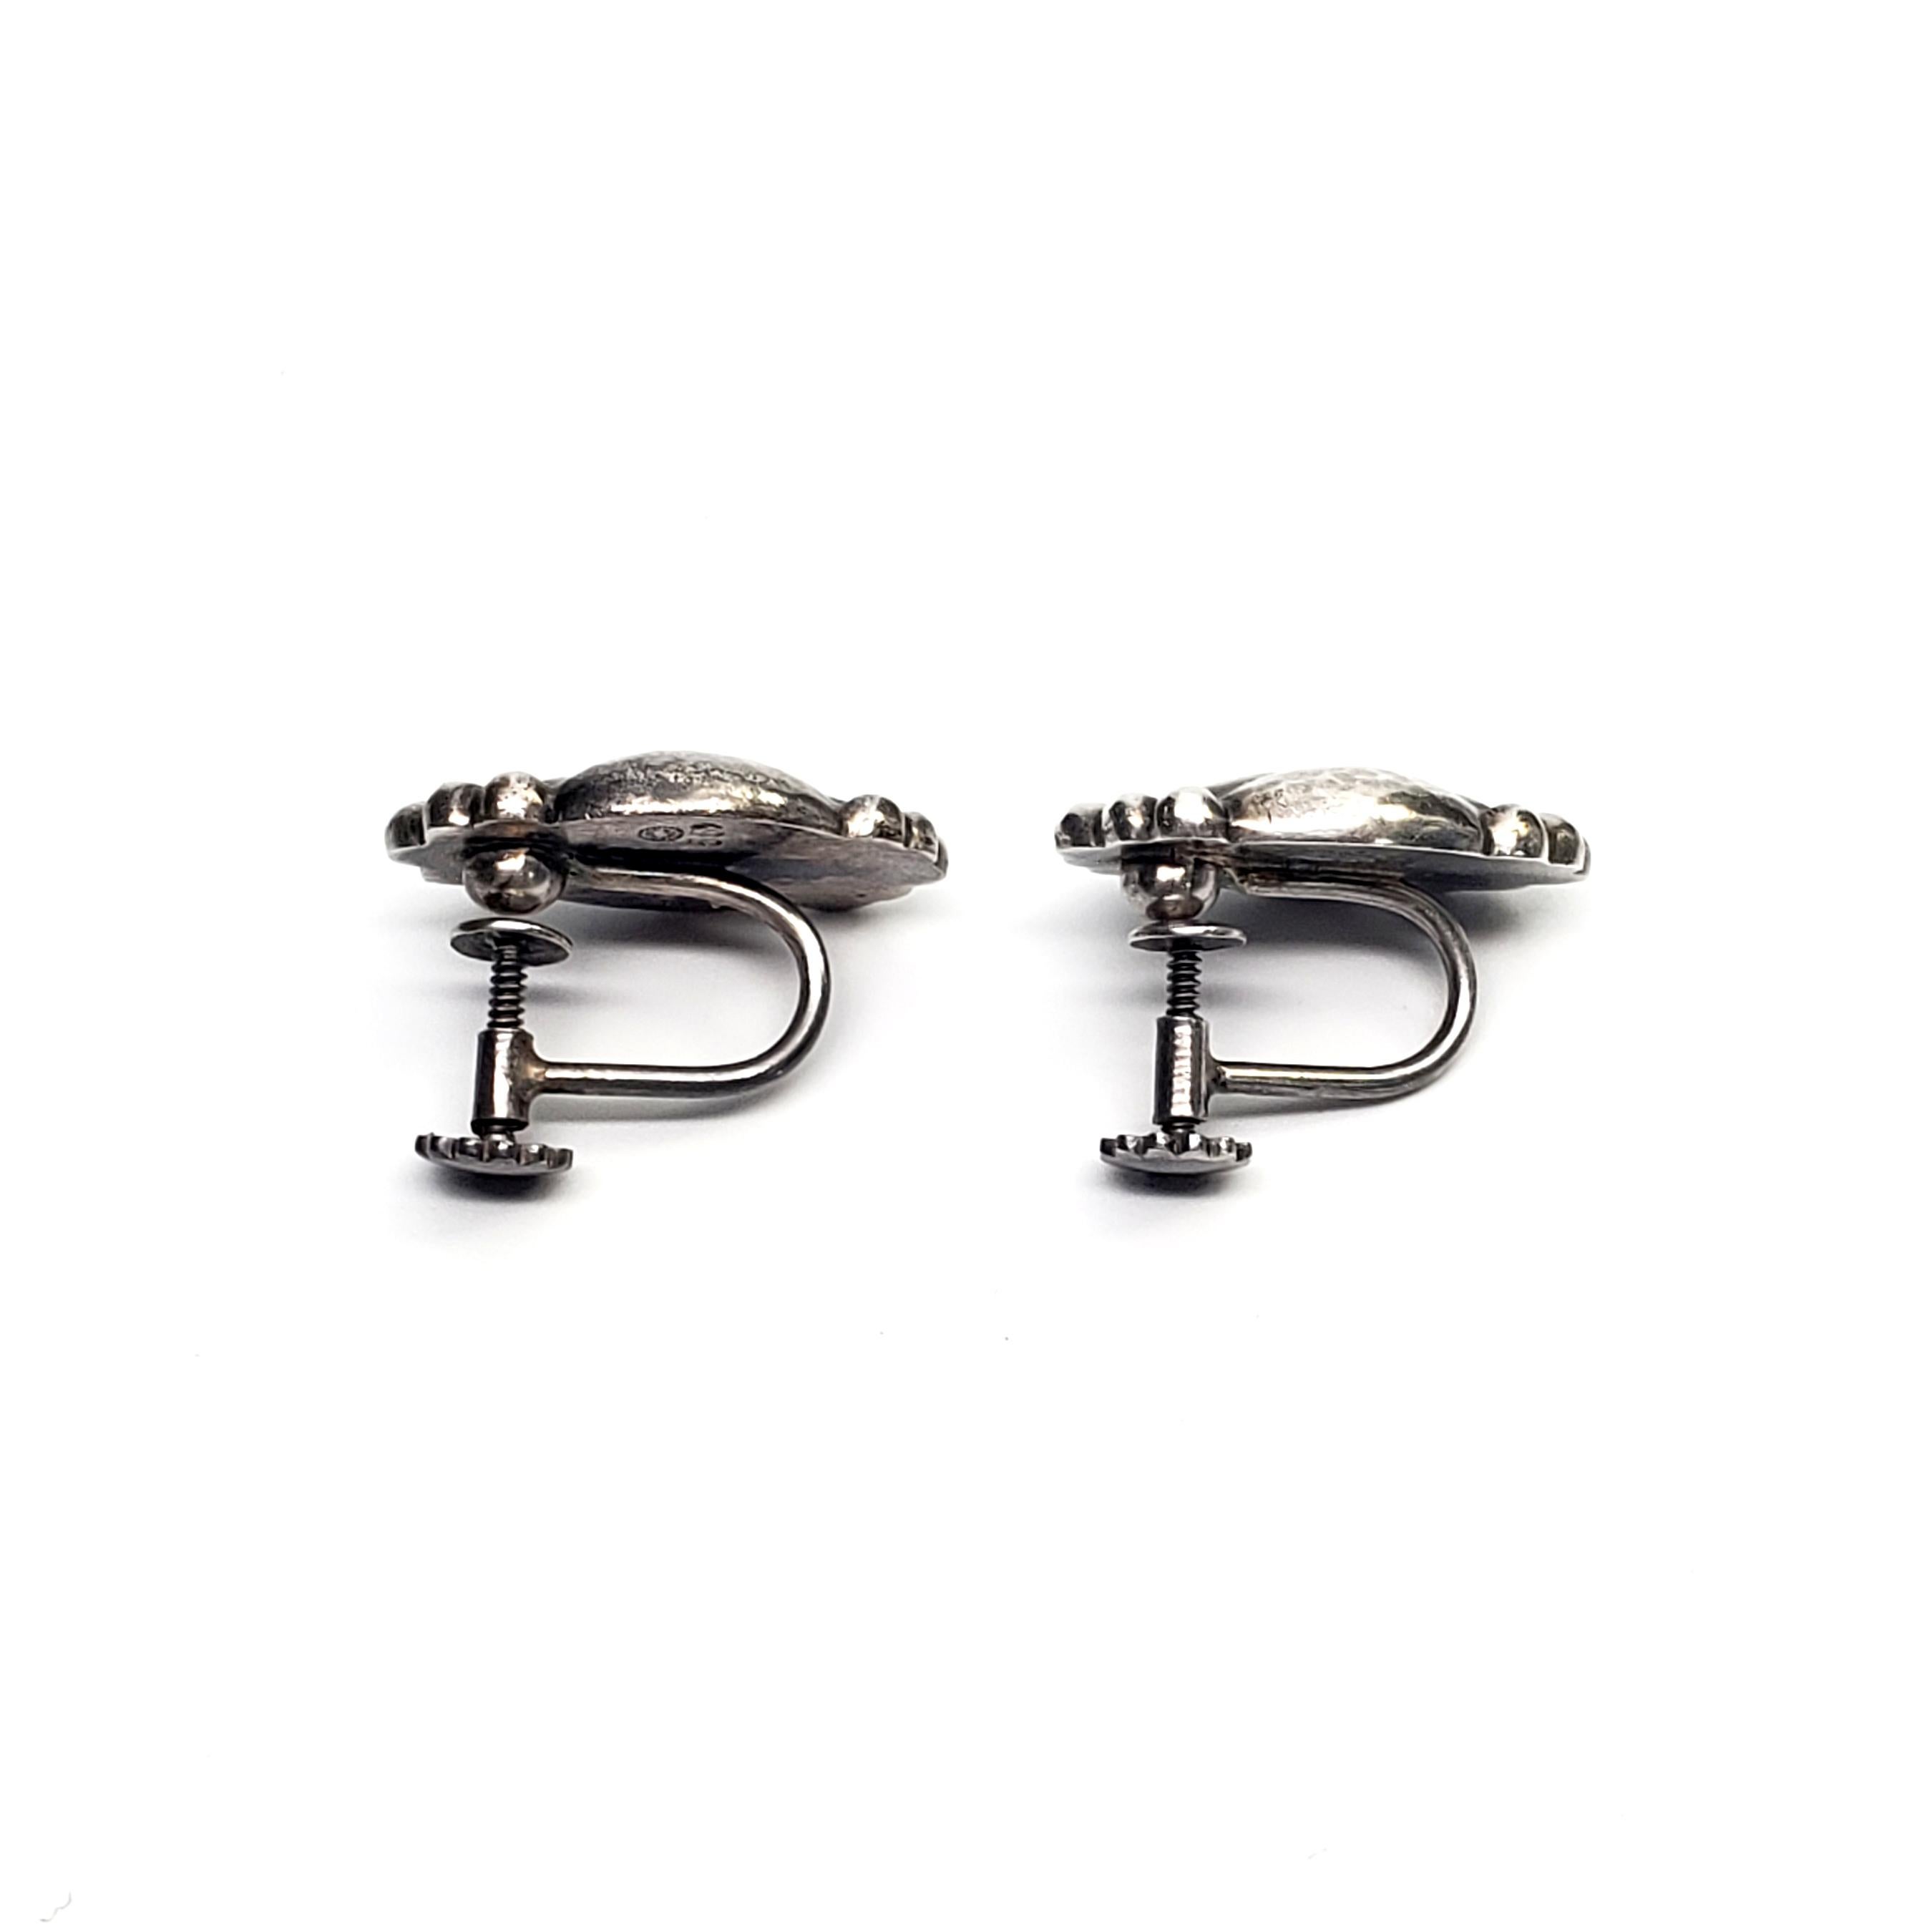 Vintage Georg Jensen sterling silver Moonlight Blossom #55 screw back earrings.

The Moonlight Blossom pattern was designed by Georg Jensen himself, inspired by nature motifs, as is typical of Georg Jensen's work. These beautiful earrings feature a